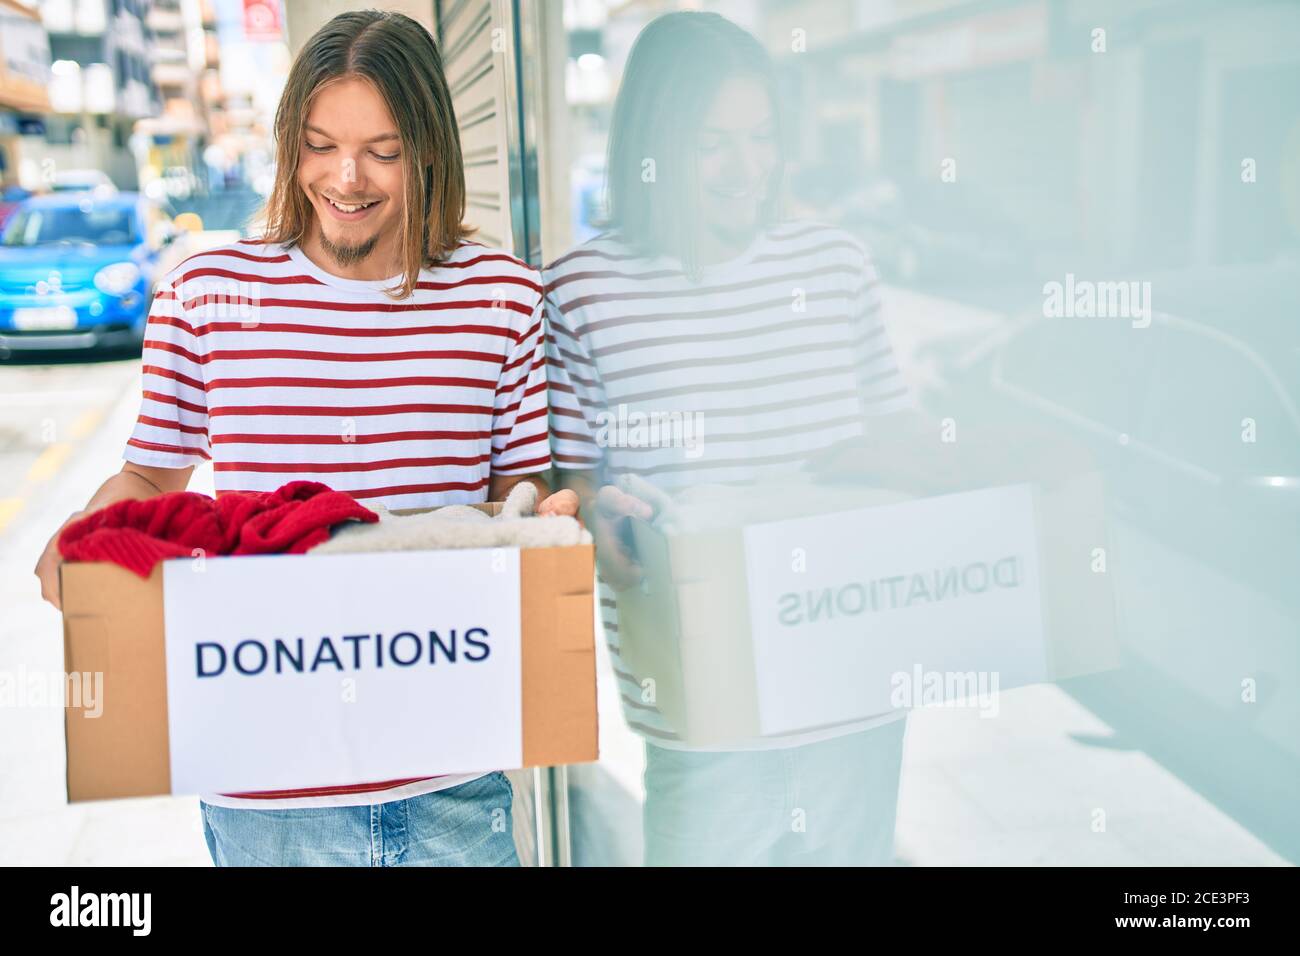 https://c8.alamy.com/comp/2CE3PF3/young-caucasian-man-with-blond-long-hair-and-beard-holding-cardboard-box-with-clothes-from-donations-2CE3PF3.jpg